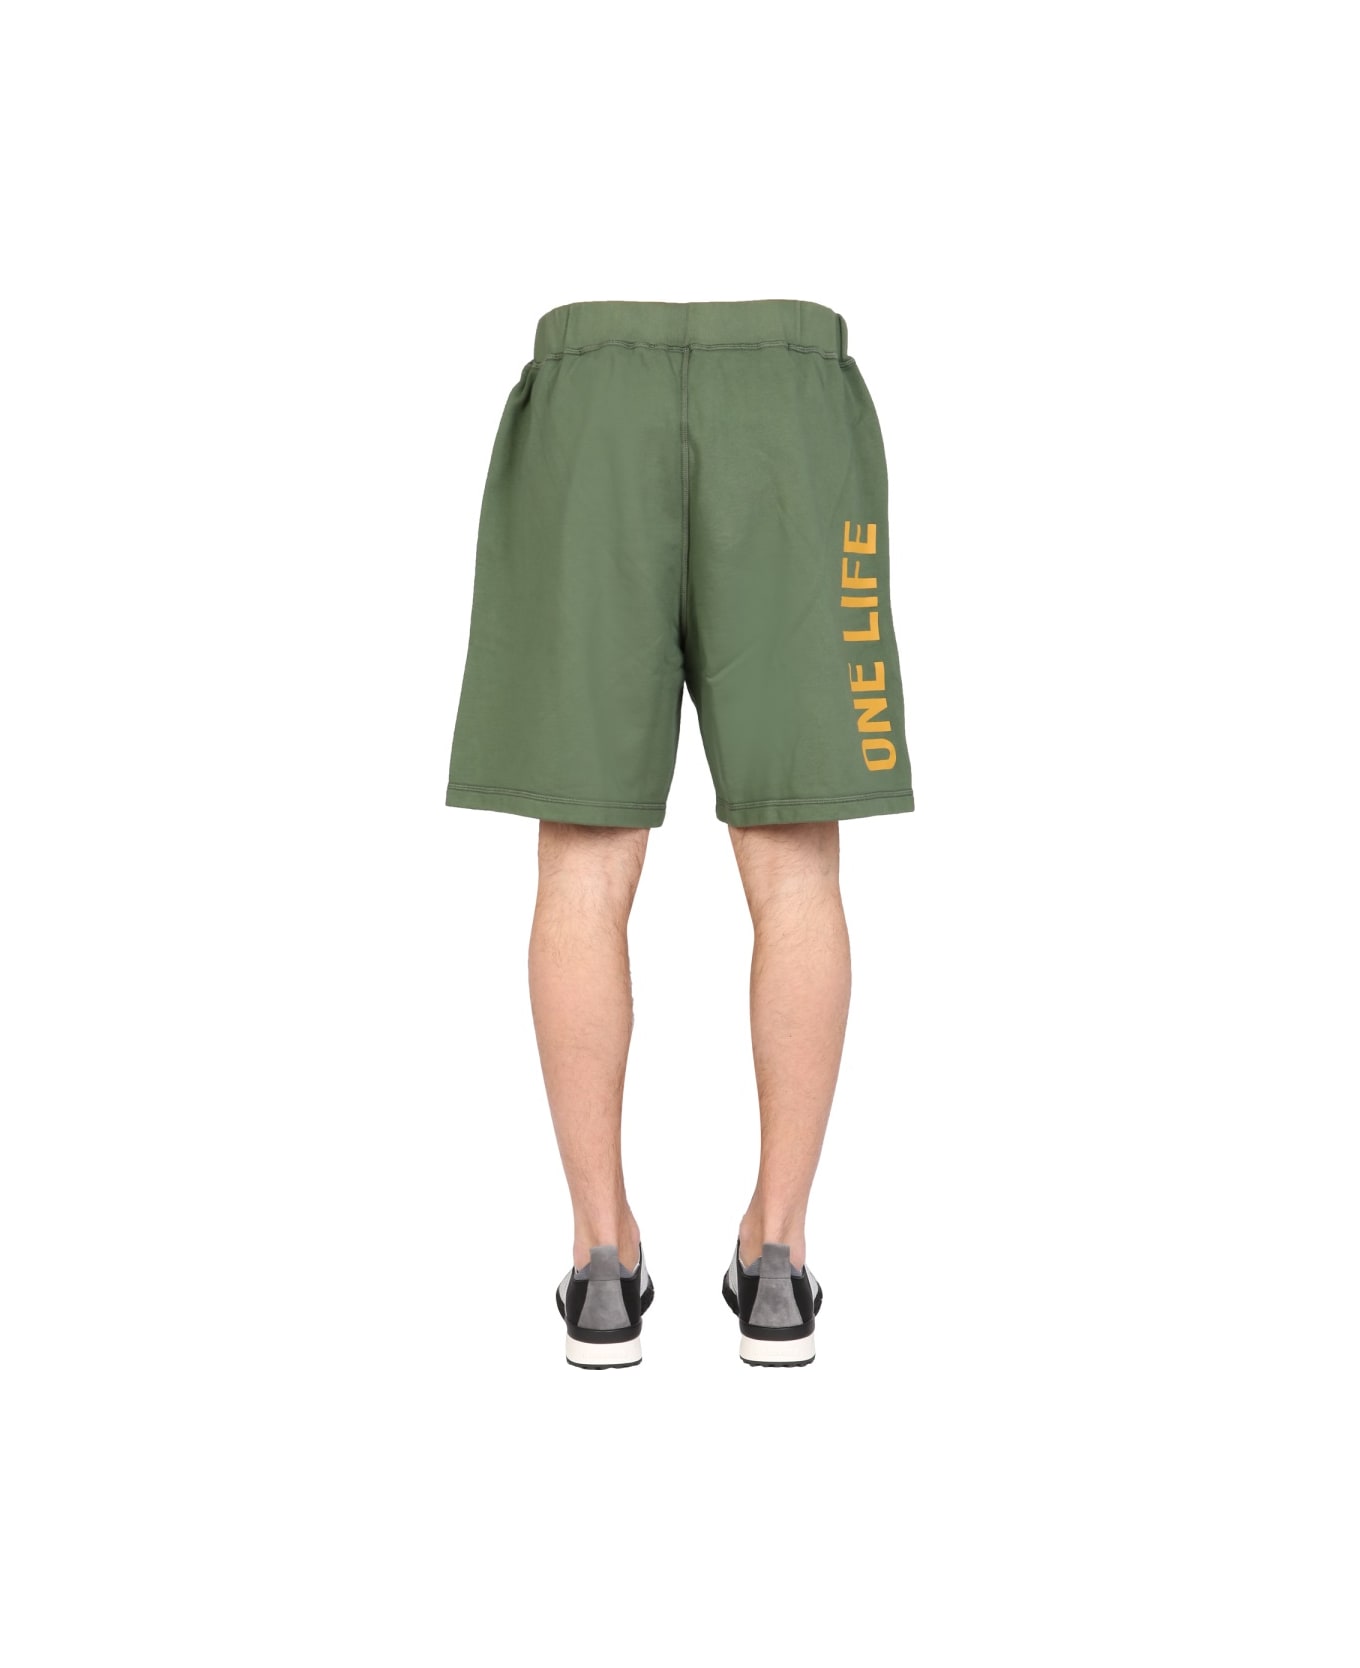 Dsquared2 "one Life One Planet" Bermuda Shorts - GREEN